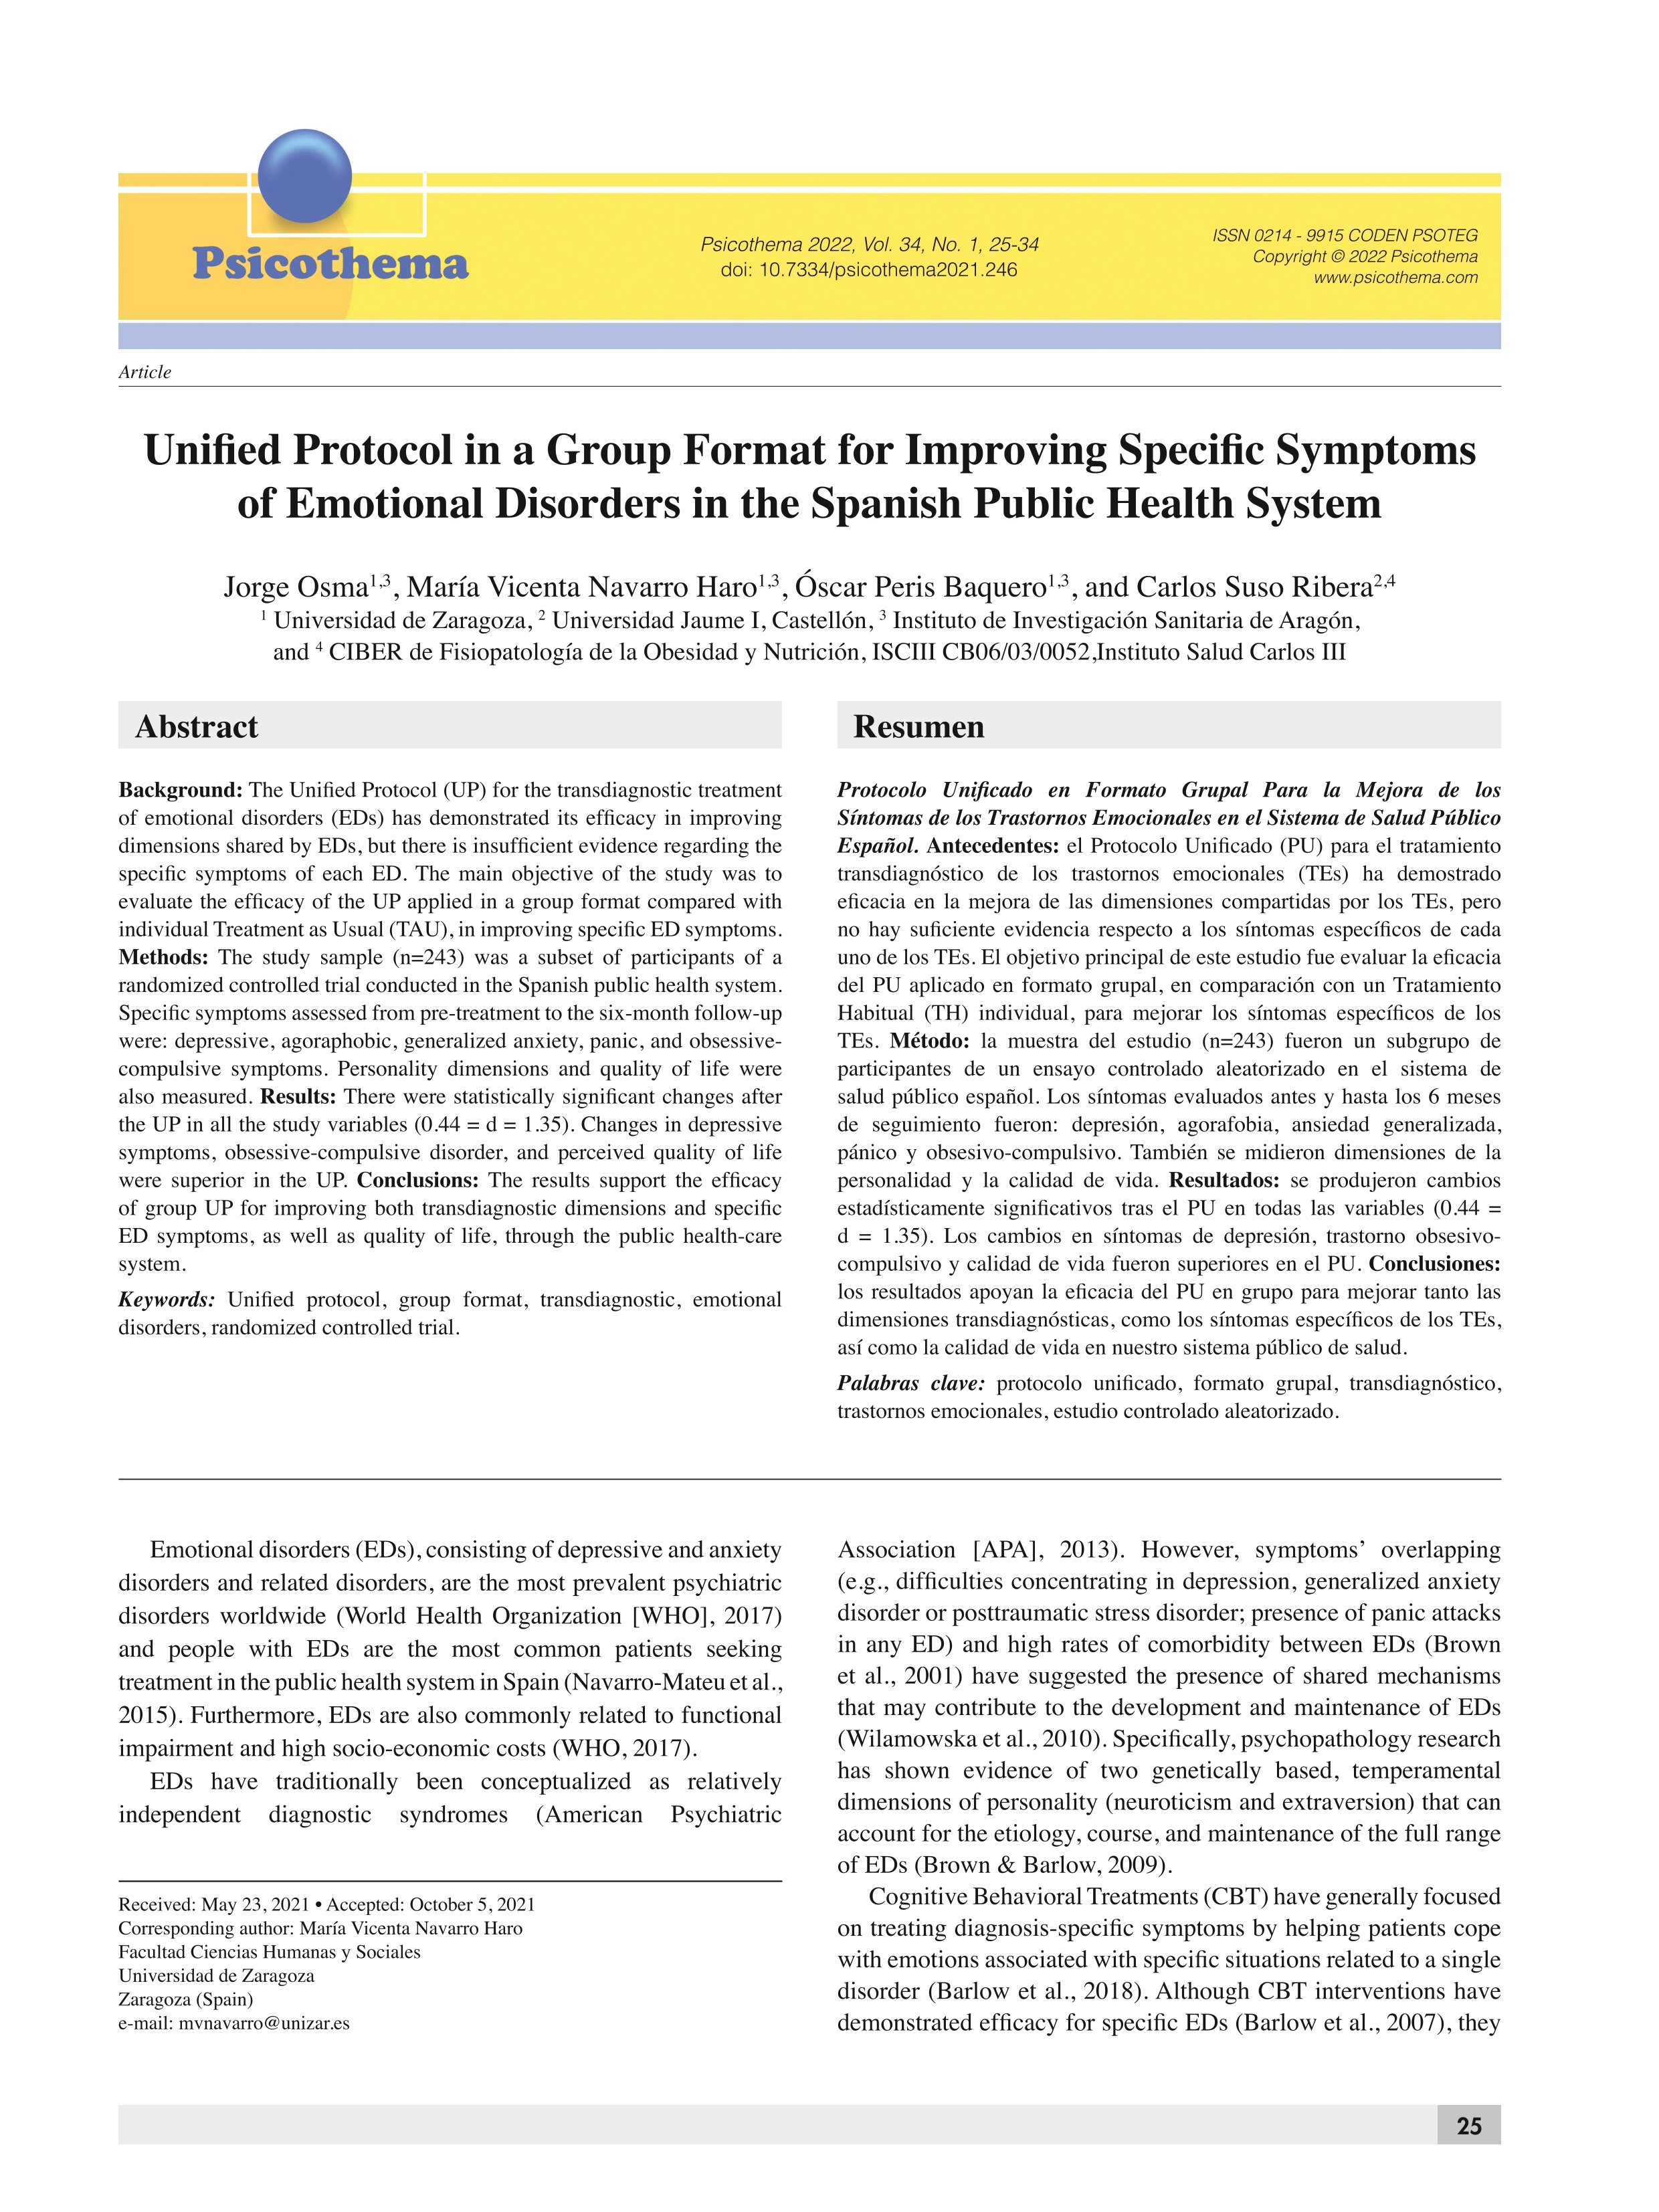 Unified Protocol in a Group Format for Improving Specific Symptoms of Emotional Disorders in the Spanish Public Health System; 35048892